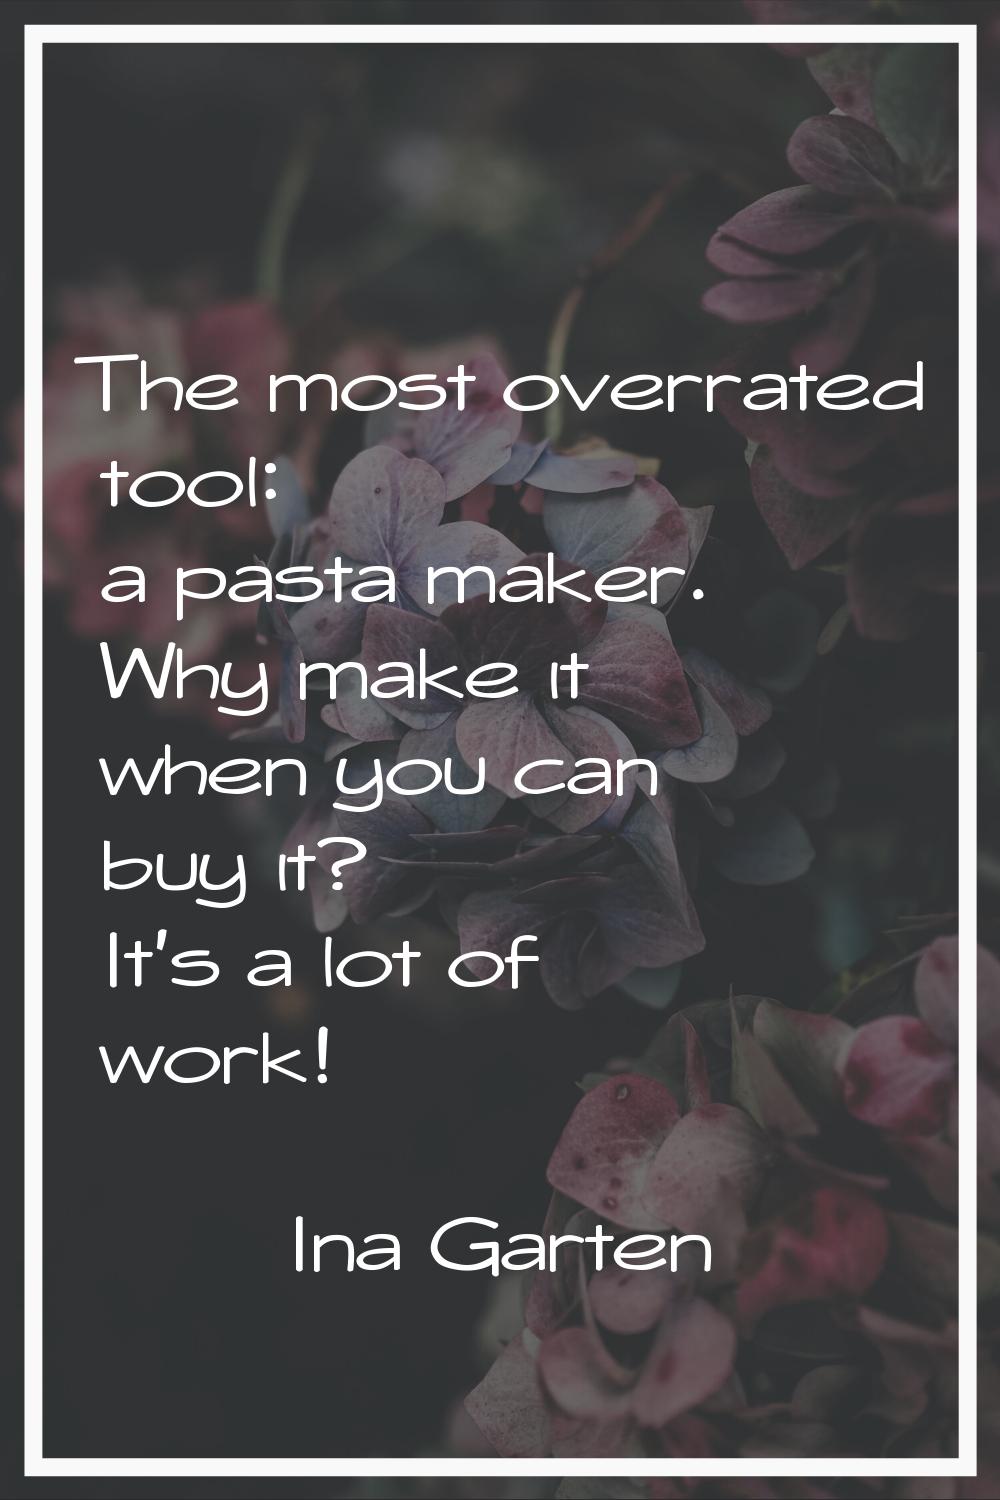 The most overrated tool: a pasta maker. Why make it when you can buy it? It's a lot of work!